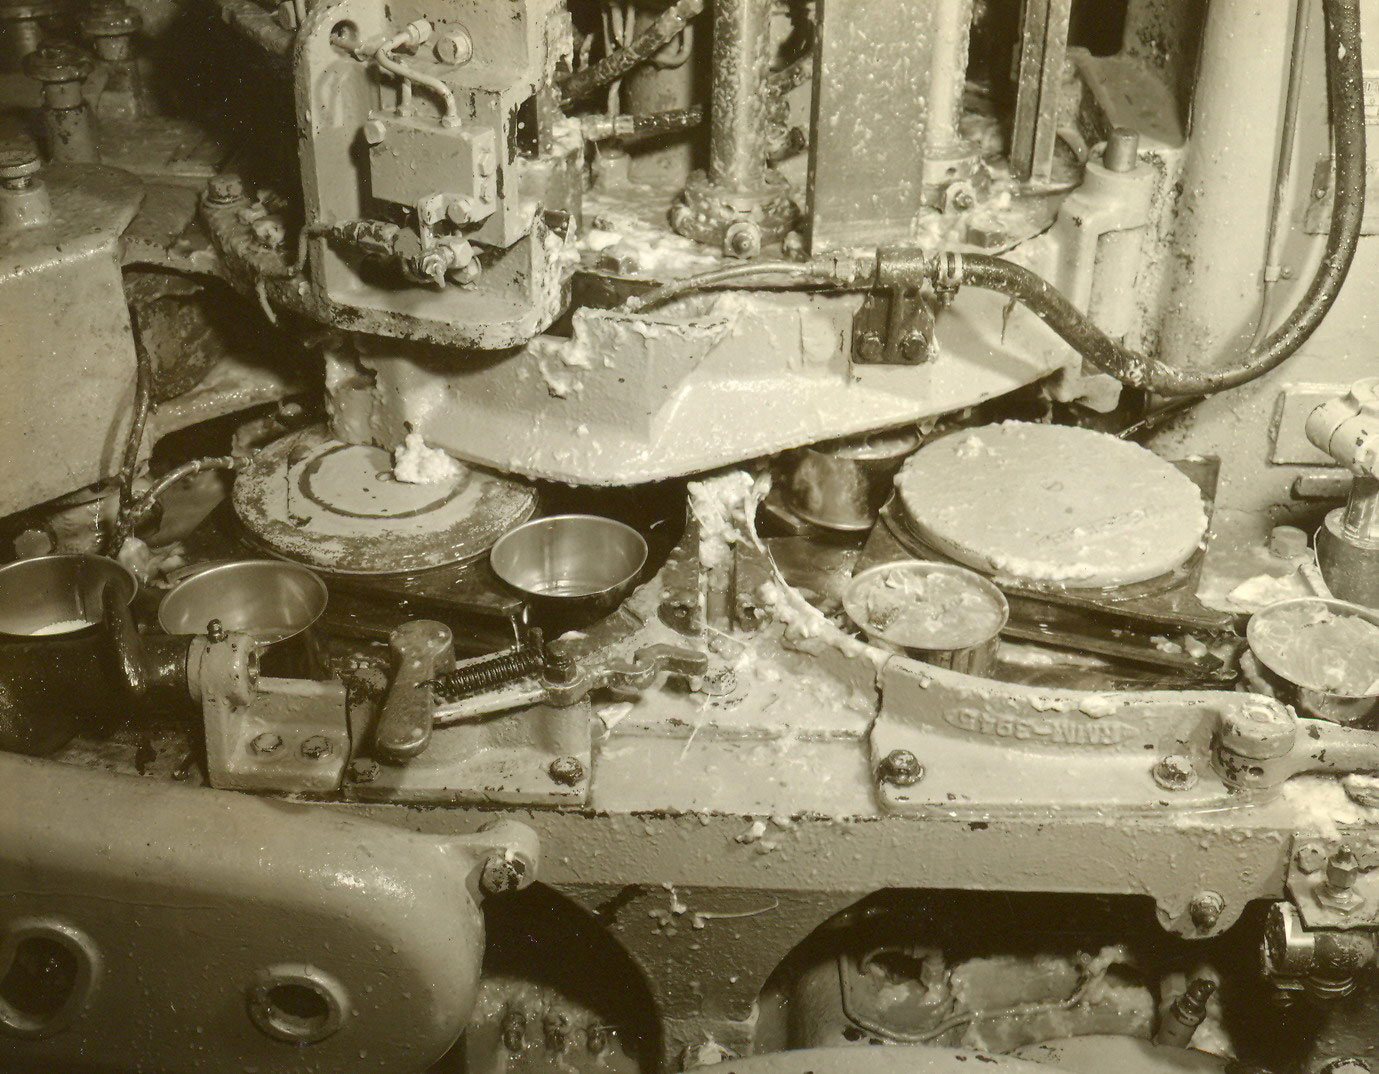 Close up photograph showing the part of the machine where the empty cans enter and filled cans exit.